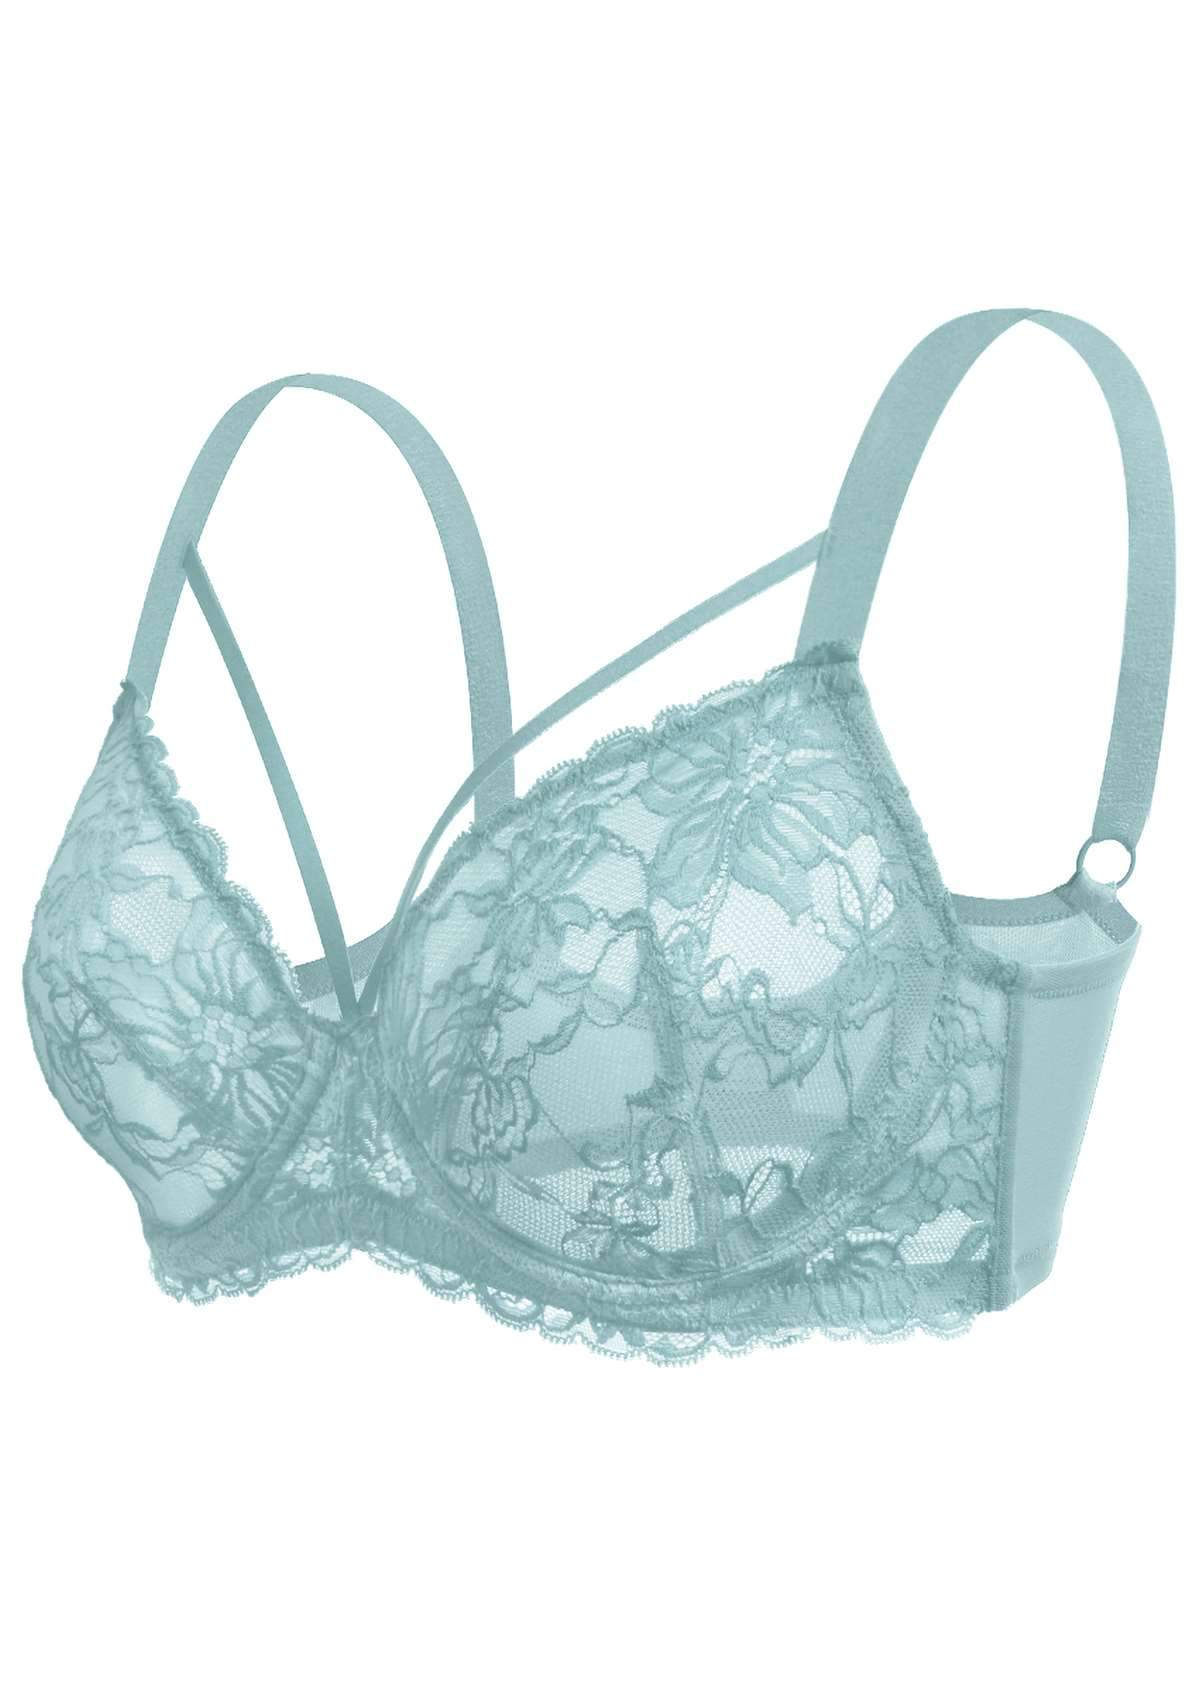 HSIA Pretty In Petals Unlined Lace Bra: Comfortable And Supportive Bra - Pewter Blue / 42 / DDD/F